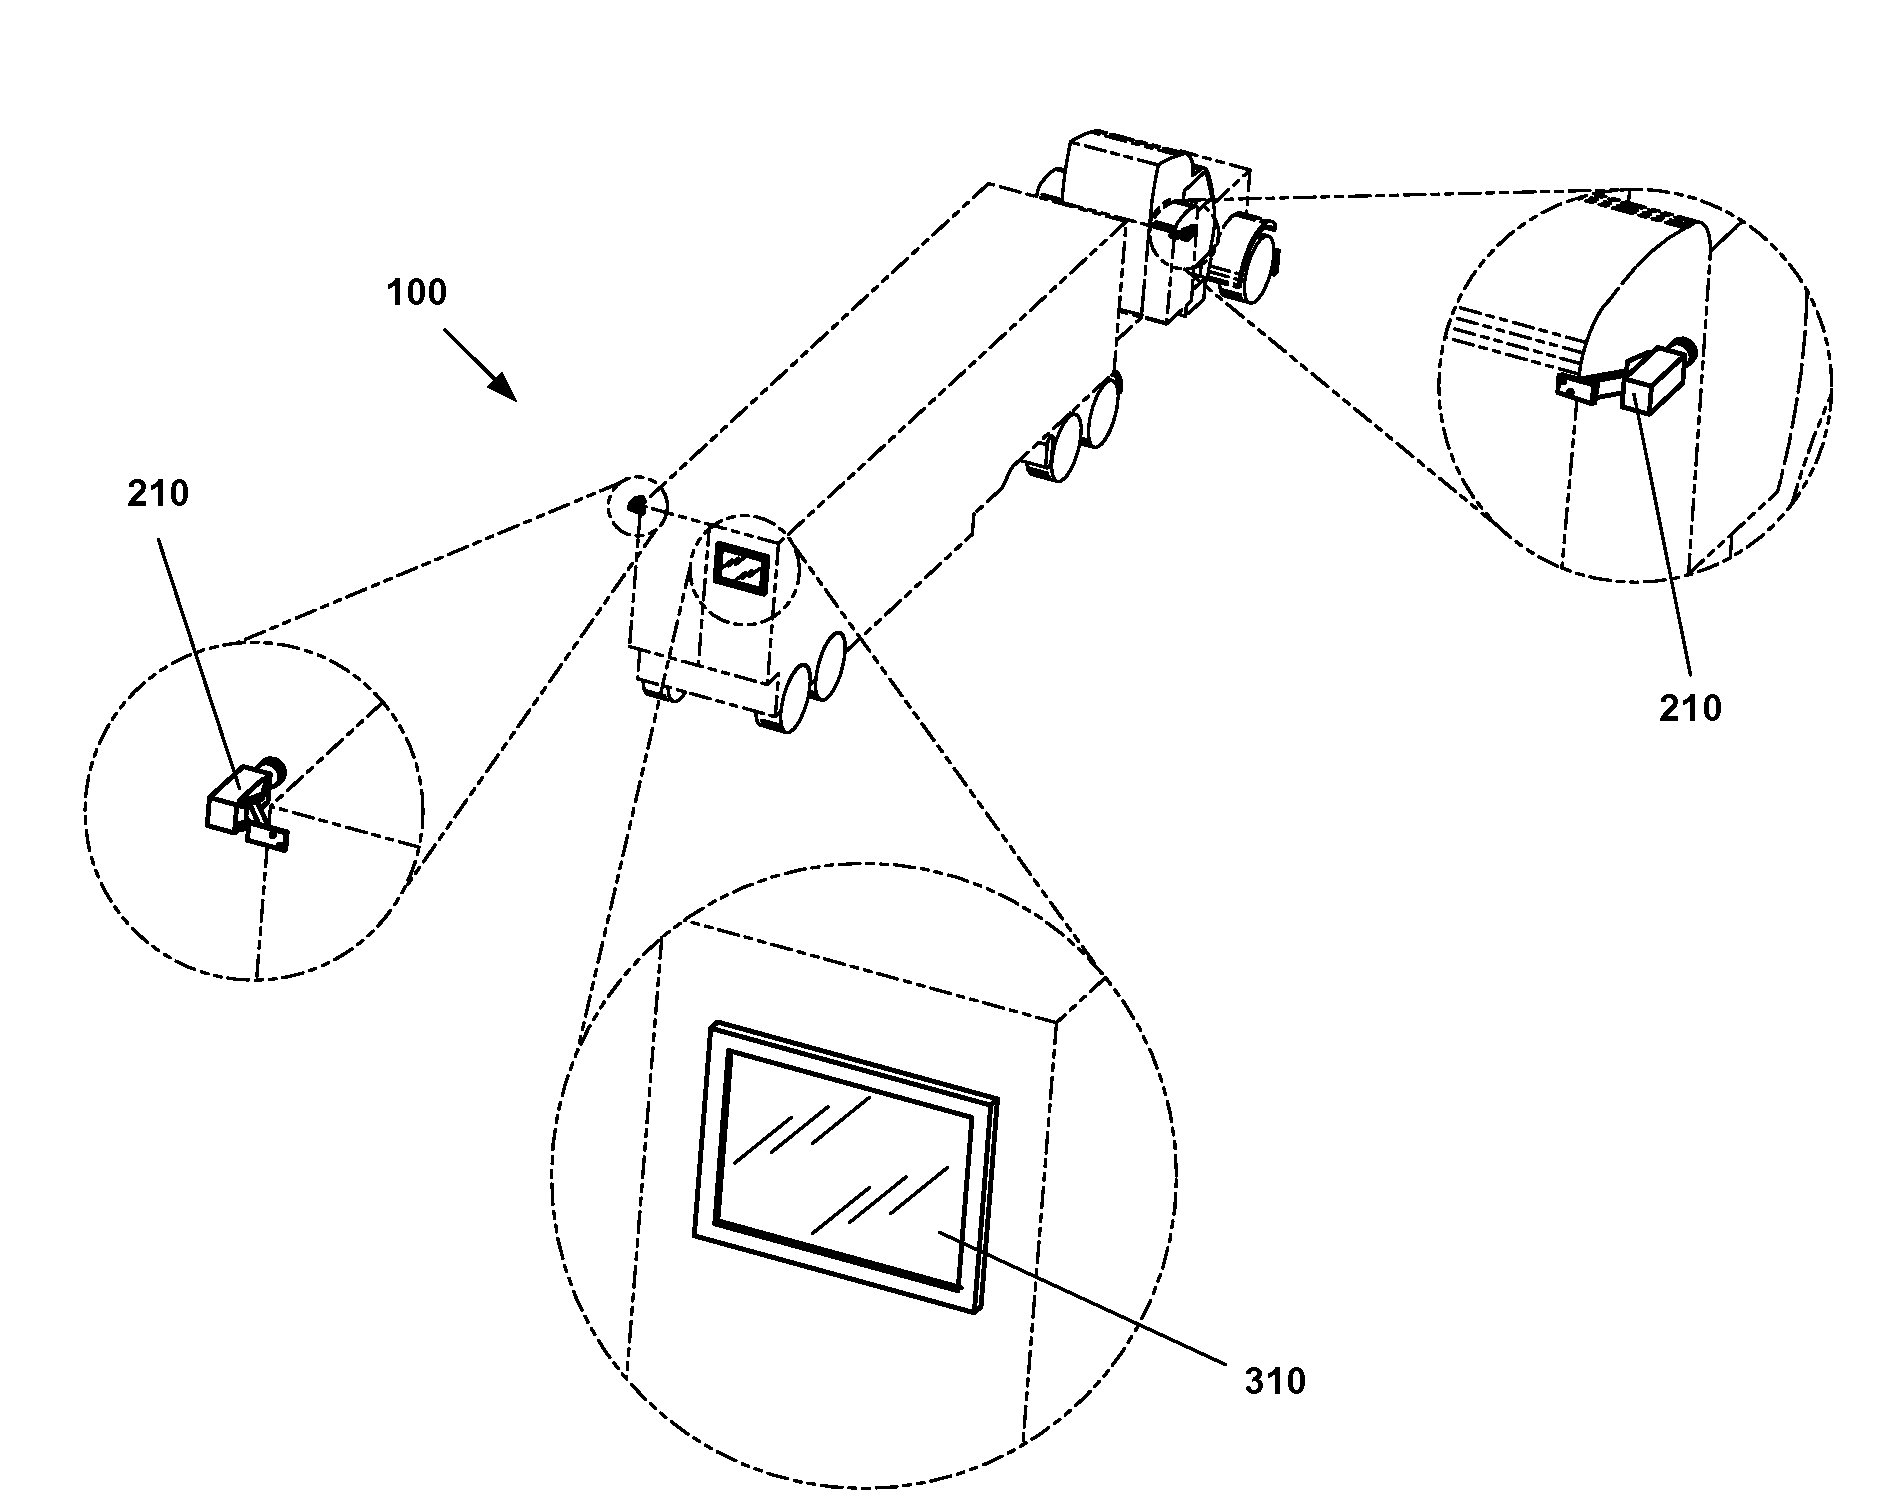 Rear facing viewing system for large vehicles